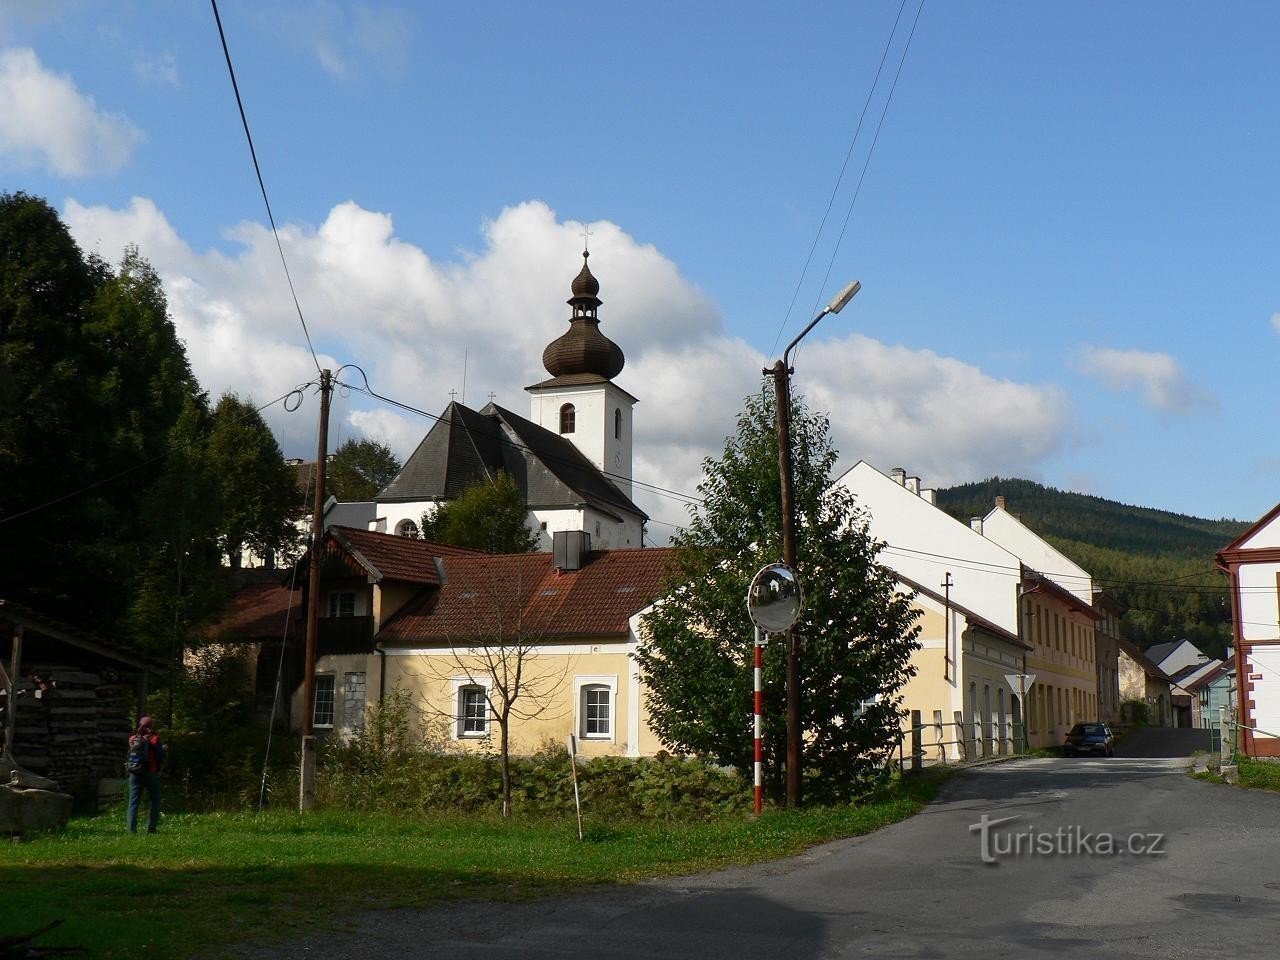 Rejštejn, view of the church from the east